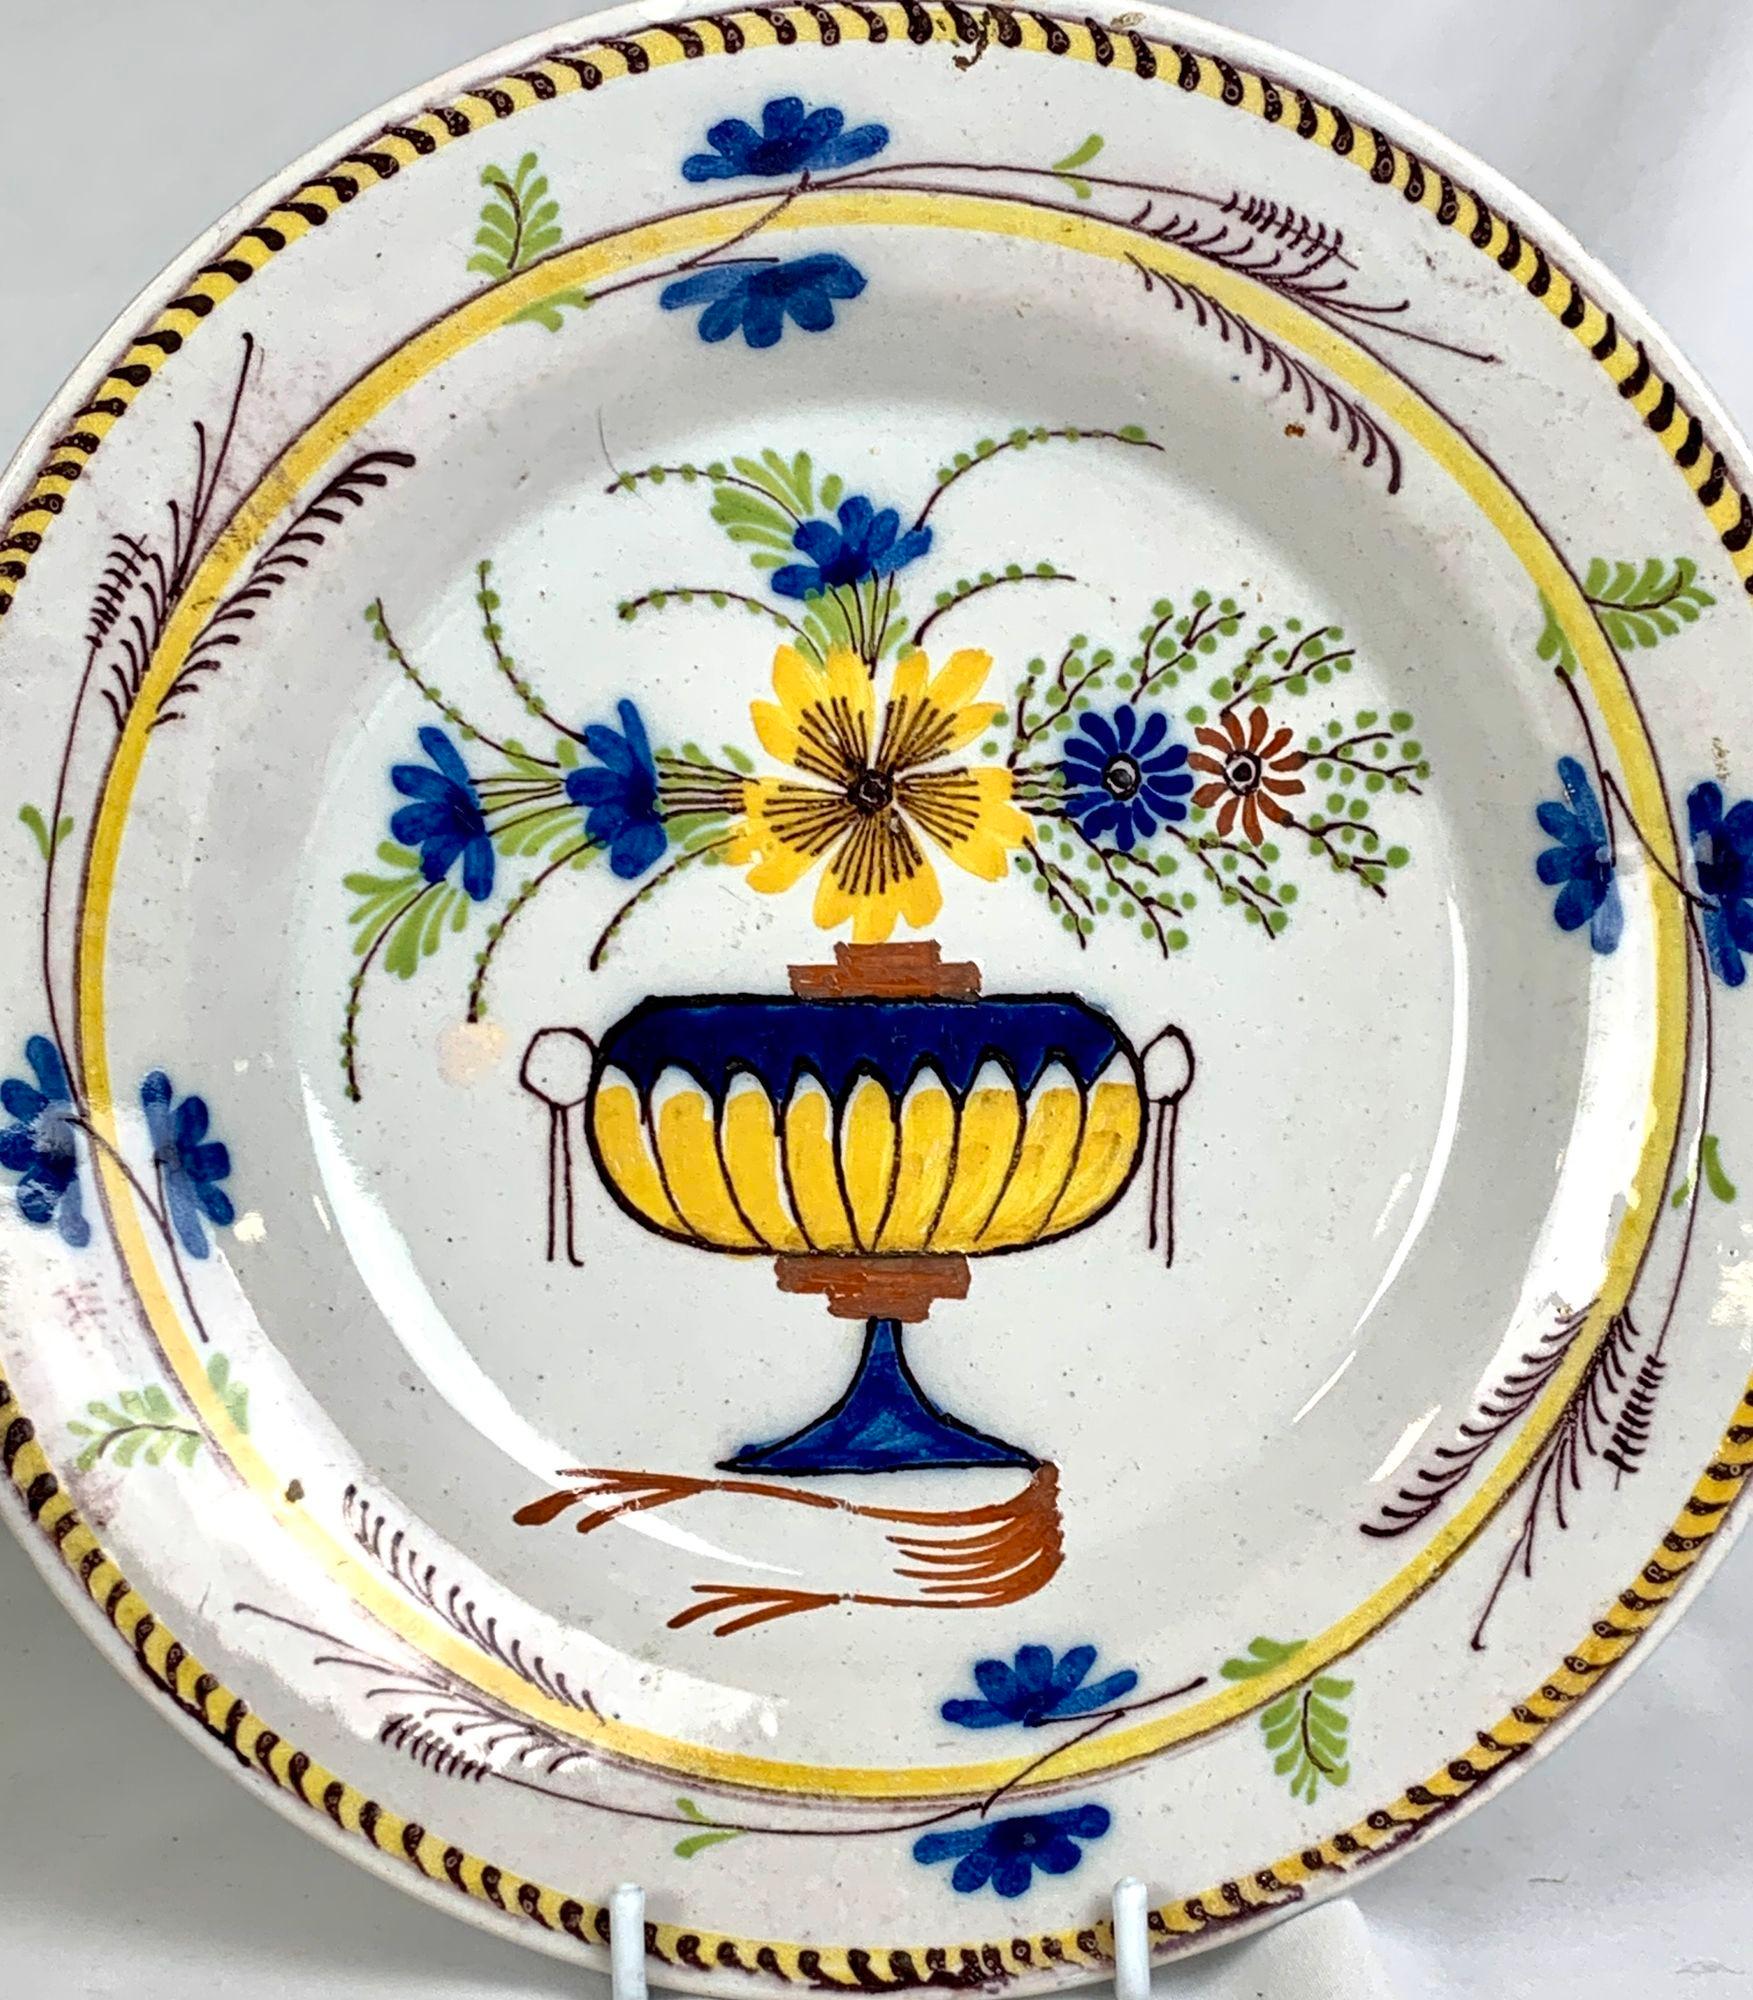 This hand painted Dutch Delft plate features a lovely flower-filled vase painted with vibrant hues of lemon yellow, blue, iron red, and purple.
The bright yellow blossom captures your attention.
Stretching gracefully across the center are four